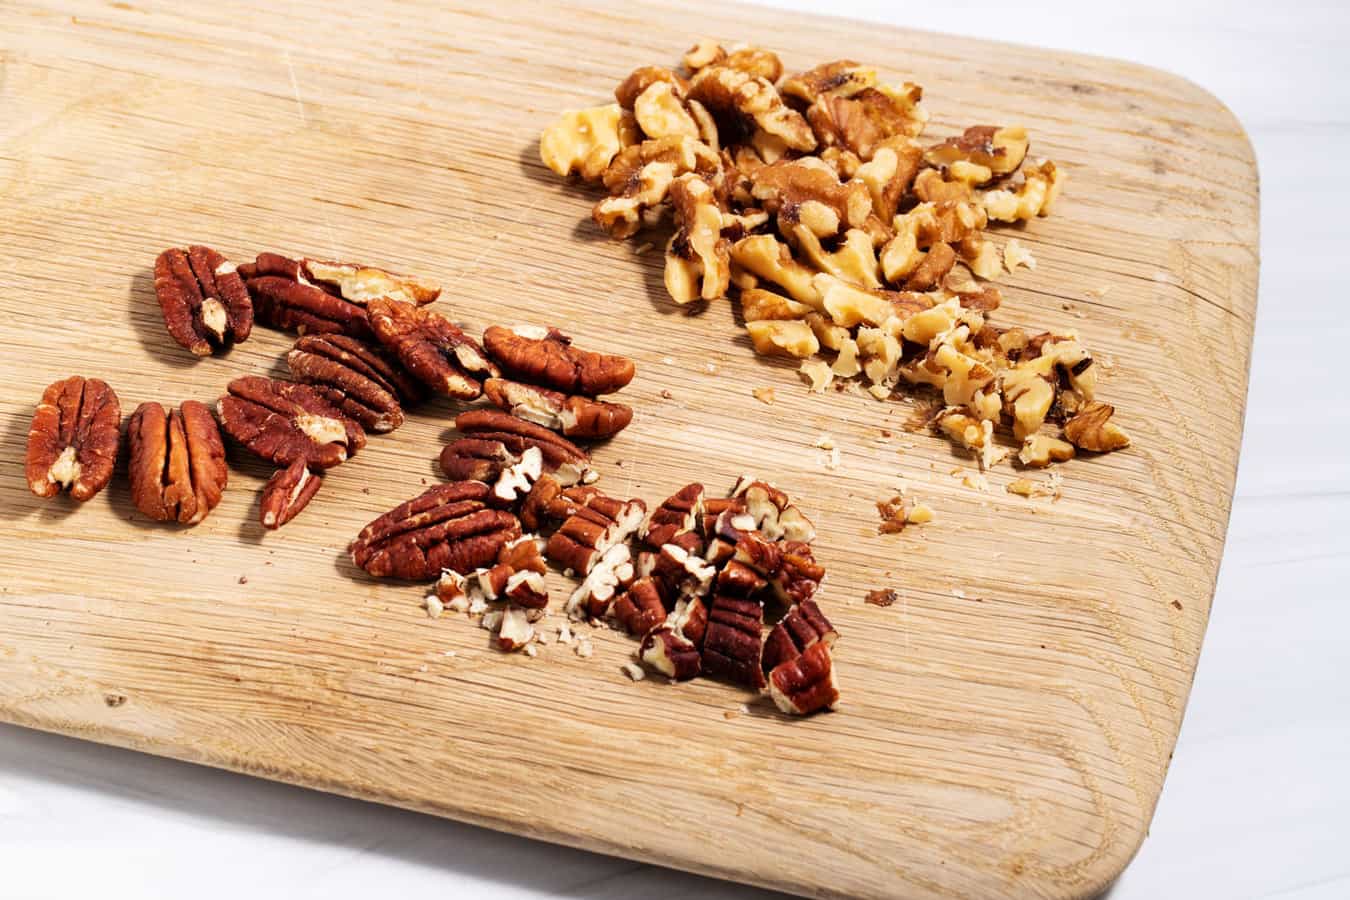 Chopped pecans and walnuts on cutting board.